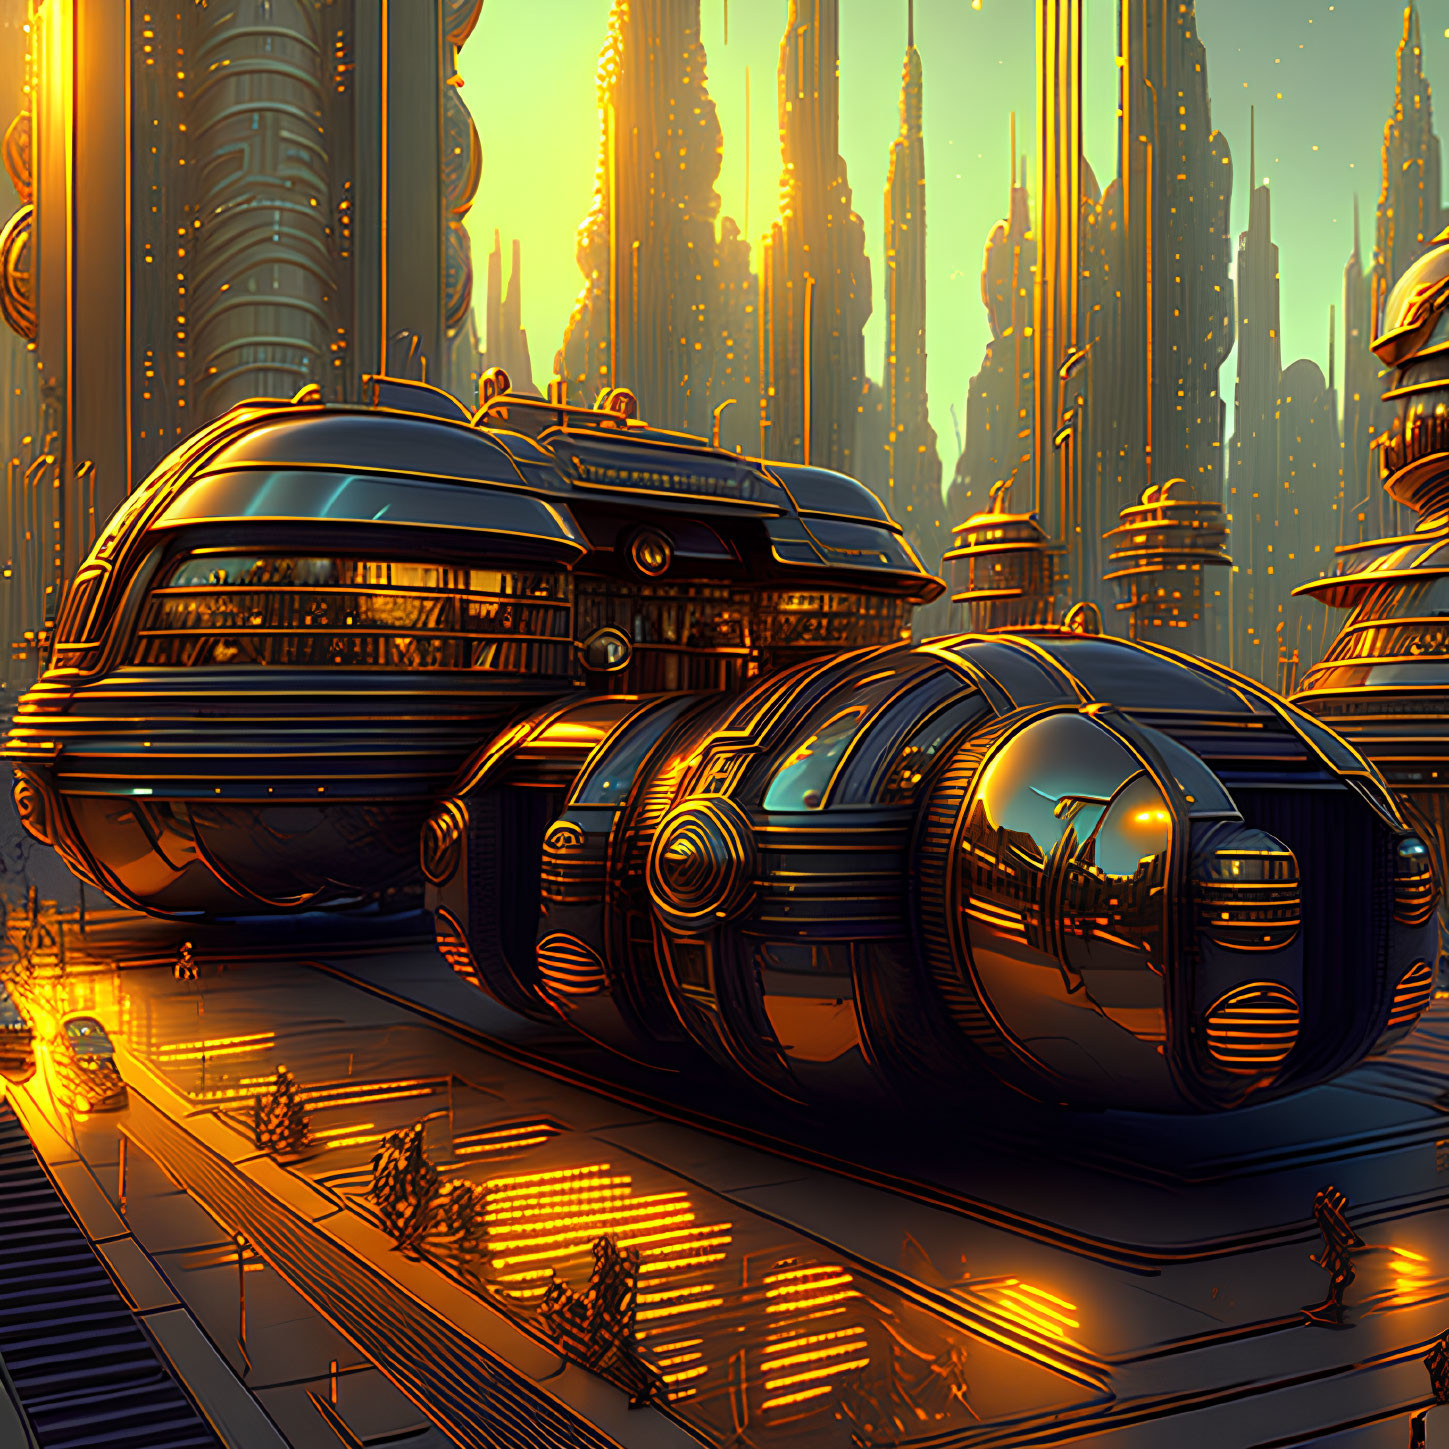 Futuristic cityscape with towering skyscrapers and advanced transportation pods.